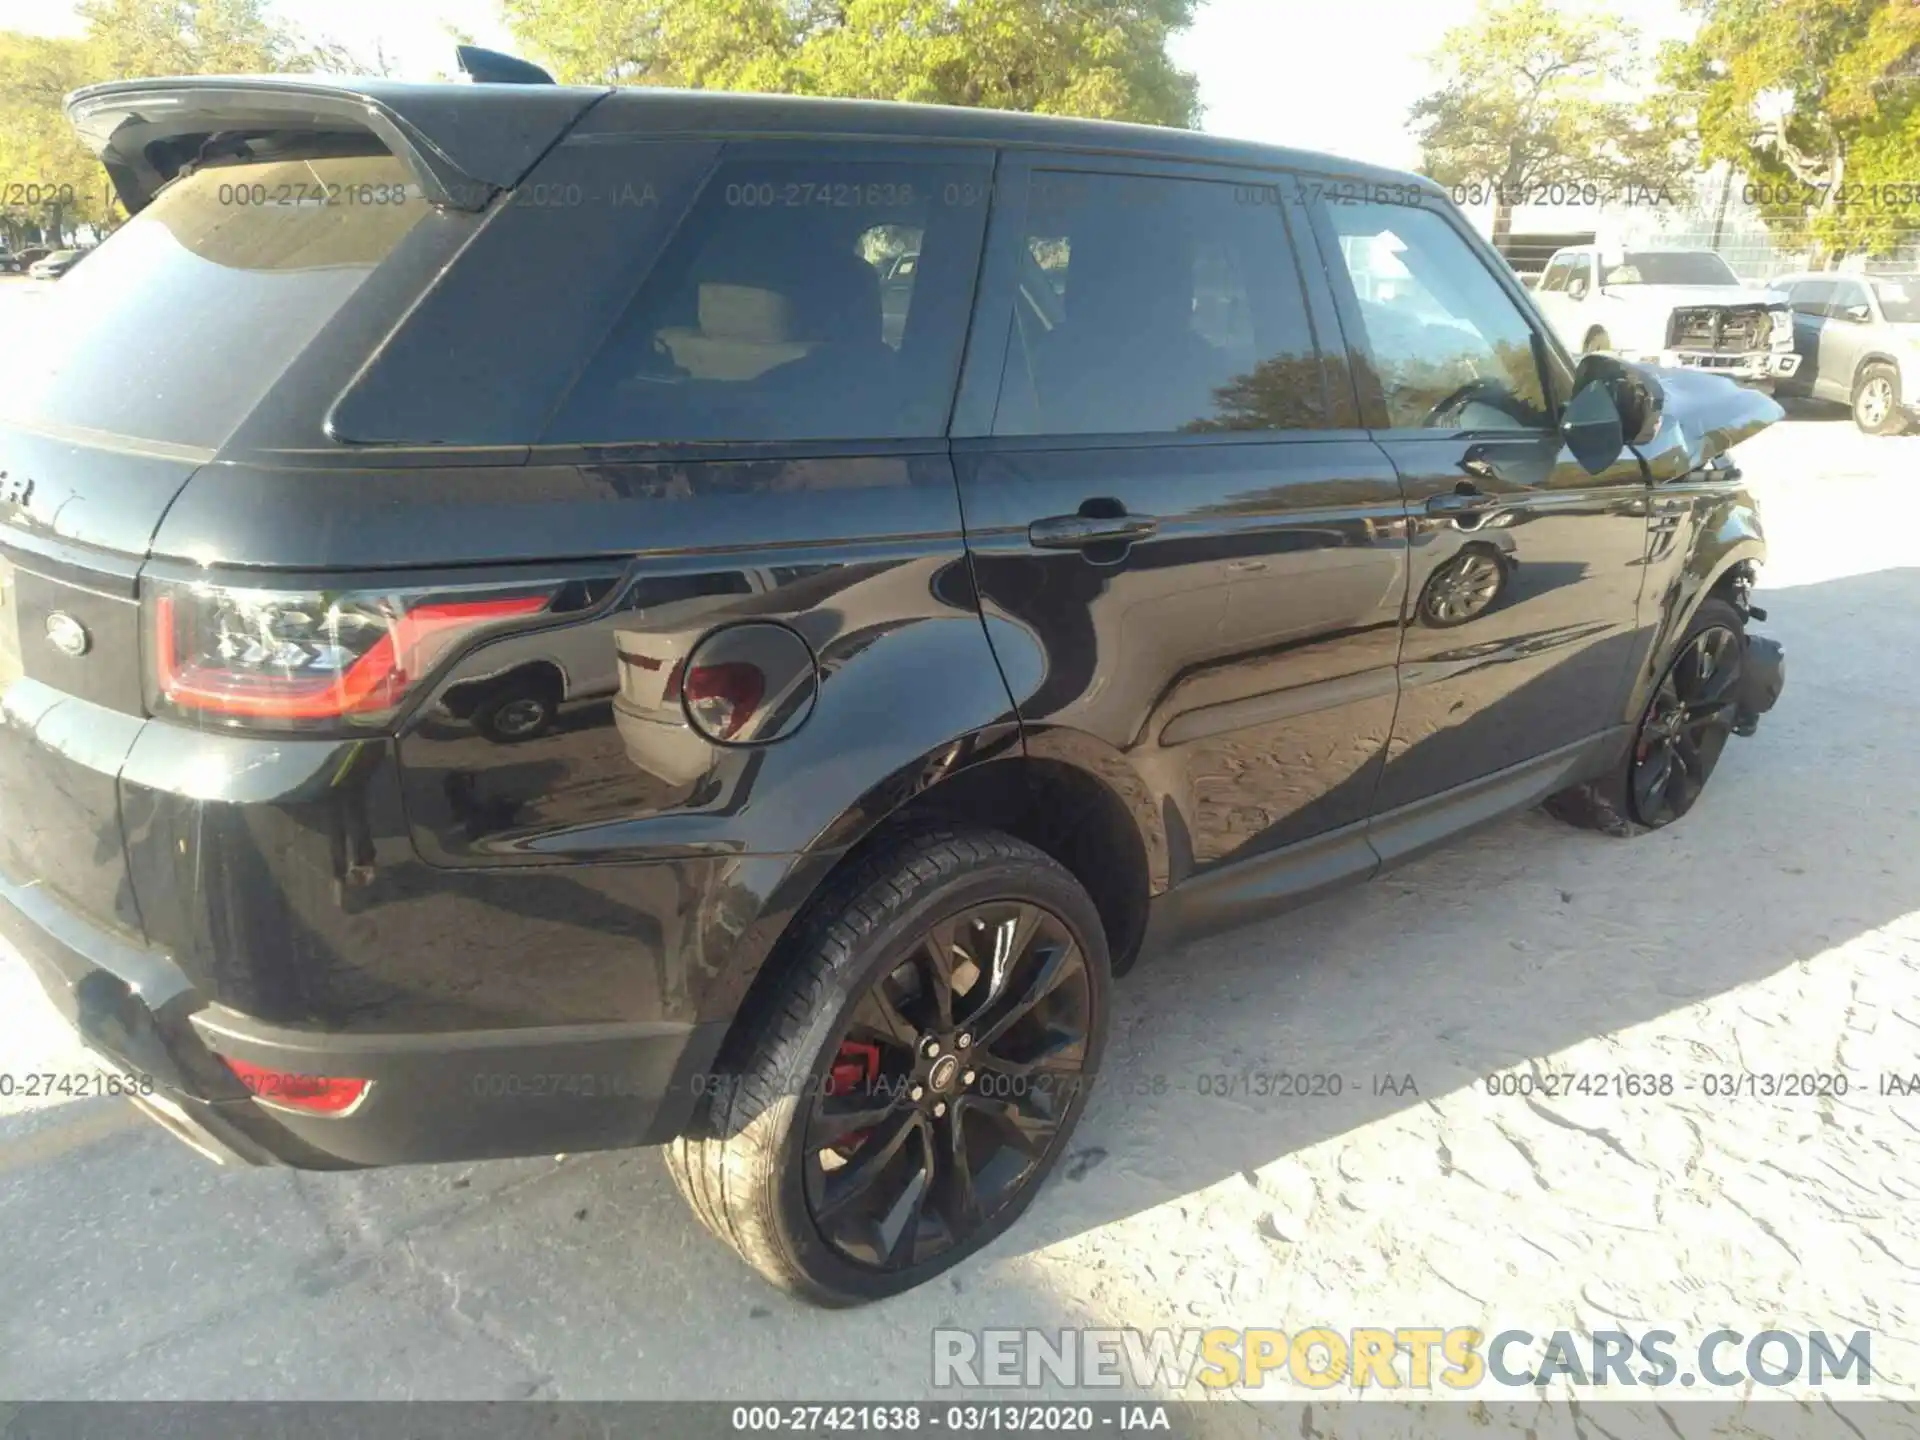 4 Photograph of a damaged car SALWG2RVXKA423559 LAND ROVER RANGE ROVER SPORT 2019